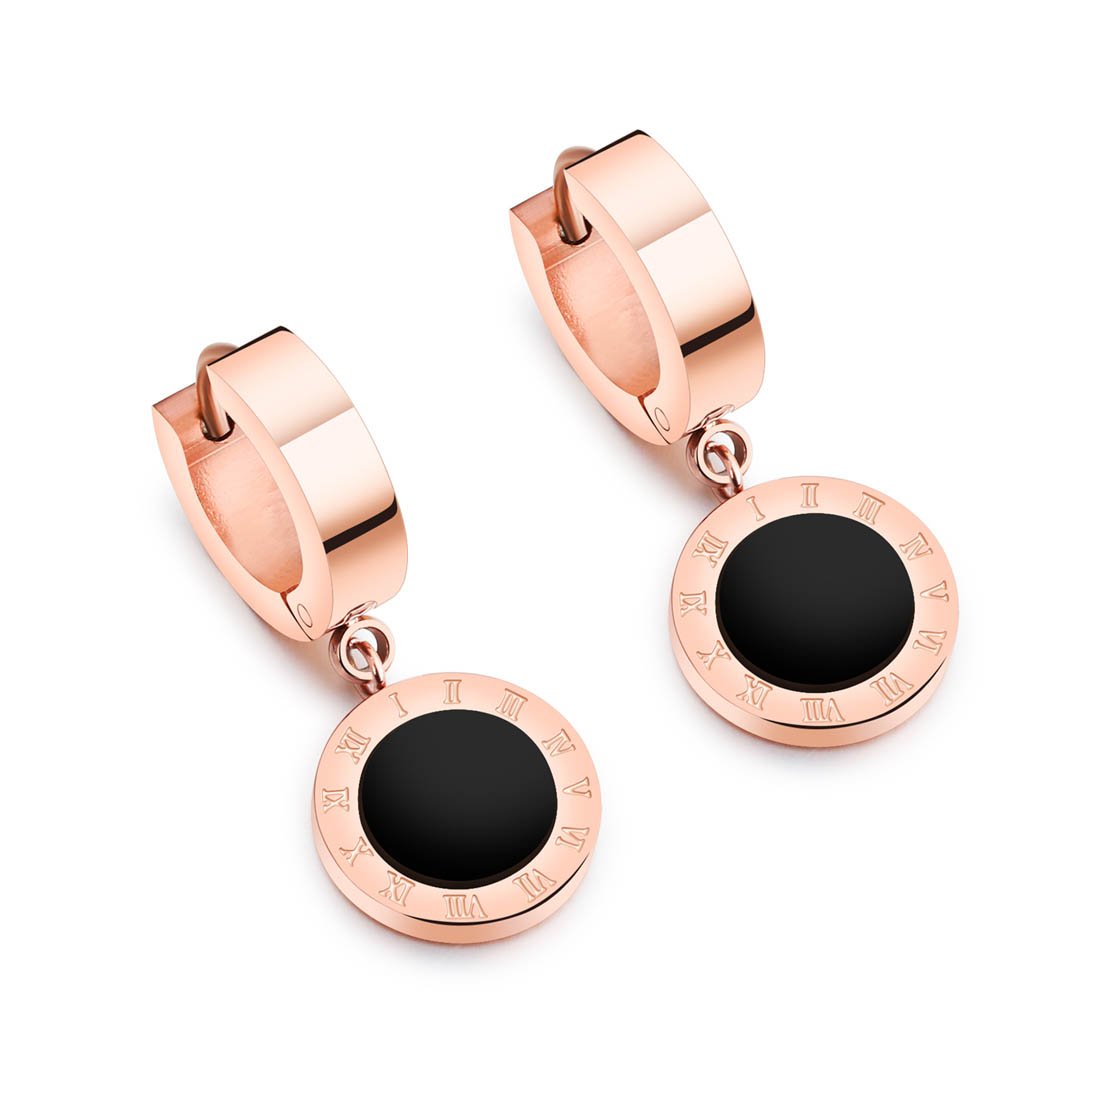 Yellow Chimes Drop Earrings for Women Western Style Stainless Steel Never Fading Rosegold Drop Earrings for Women and Girls.